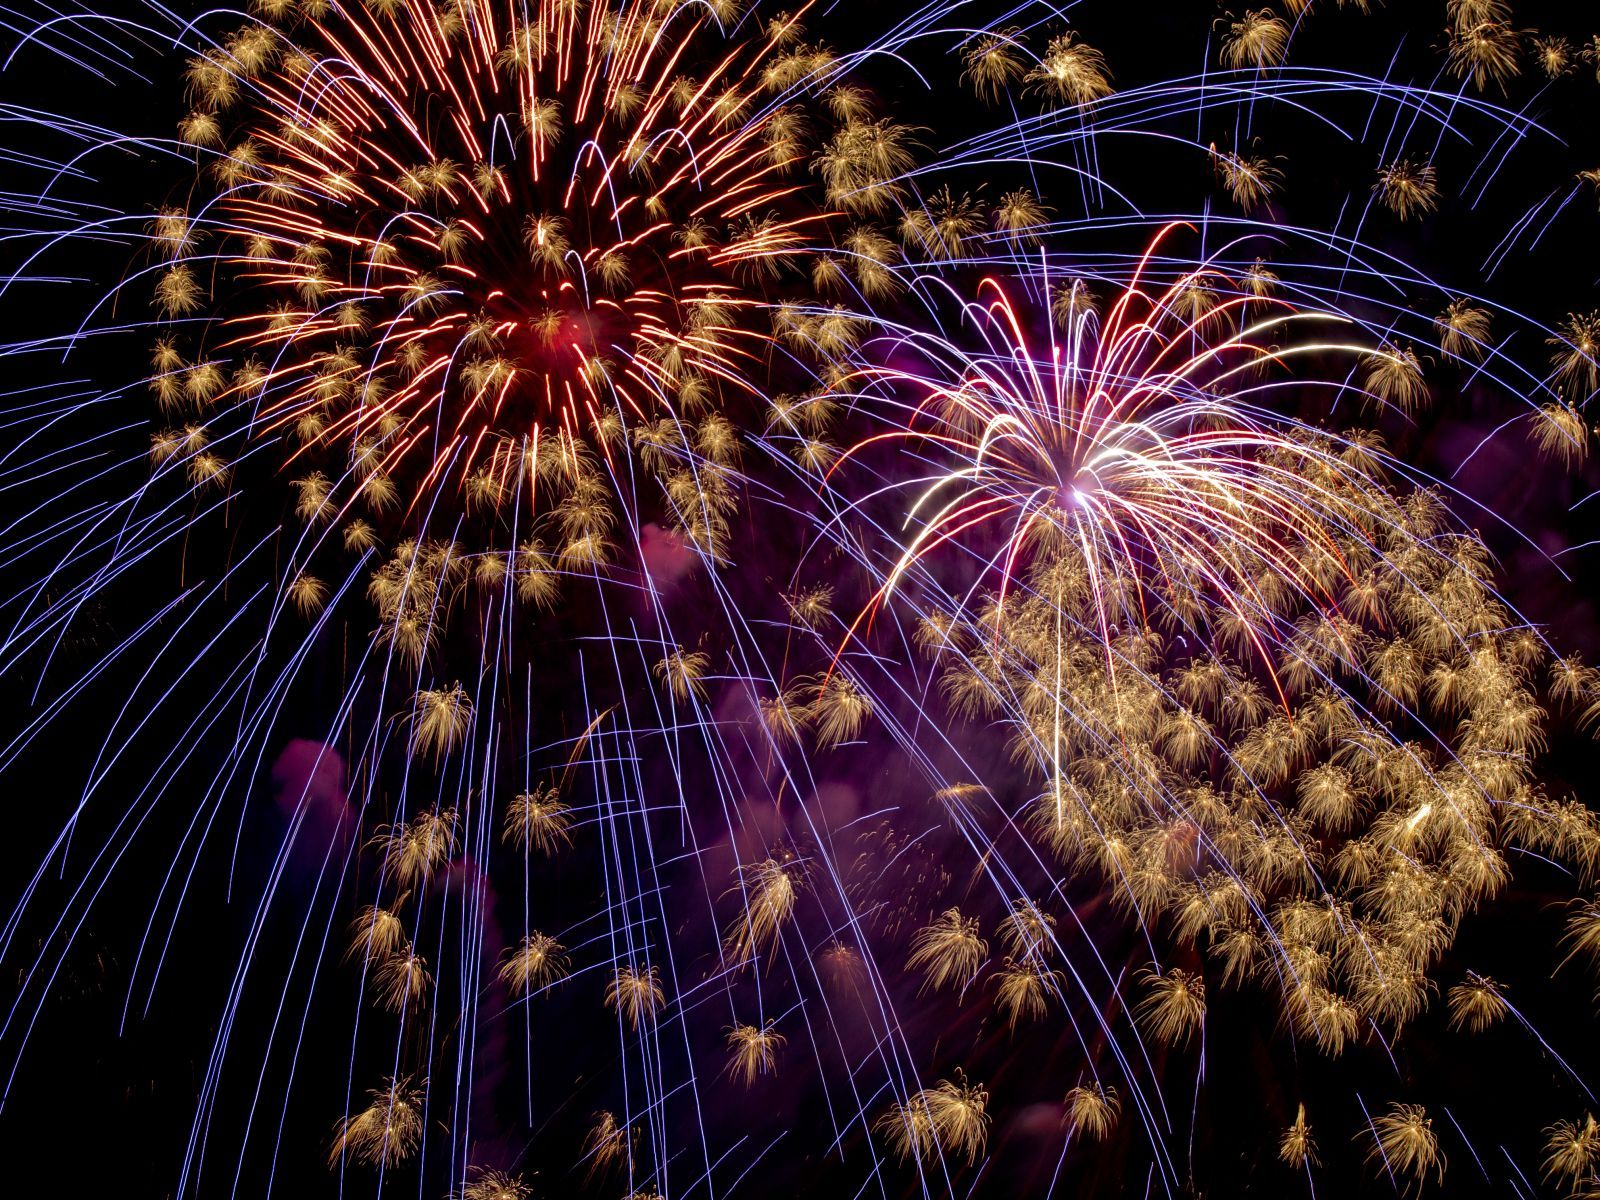 14 Fun Facts About Fireworks | Arts & Culture| Smithsonian Magazine